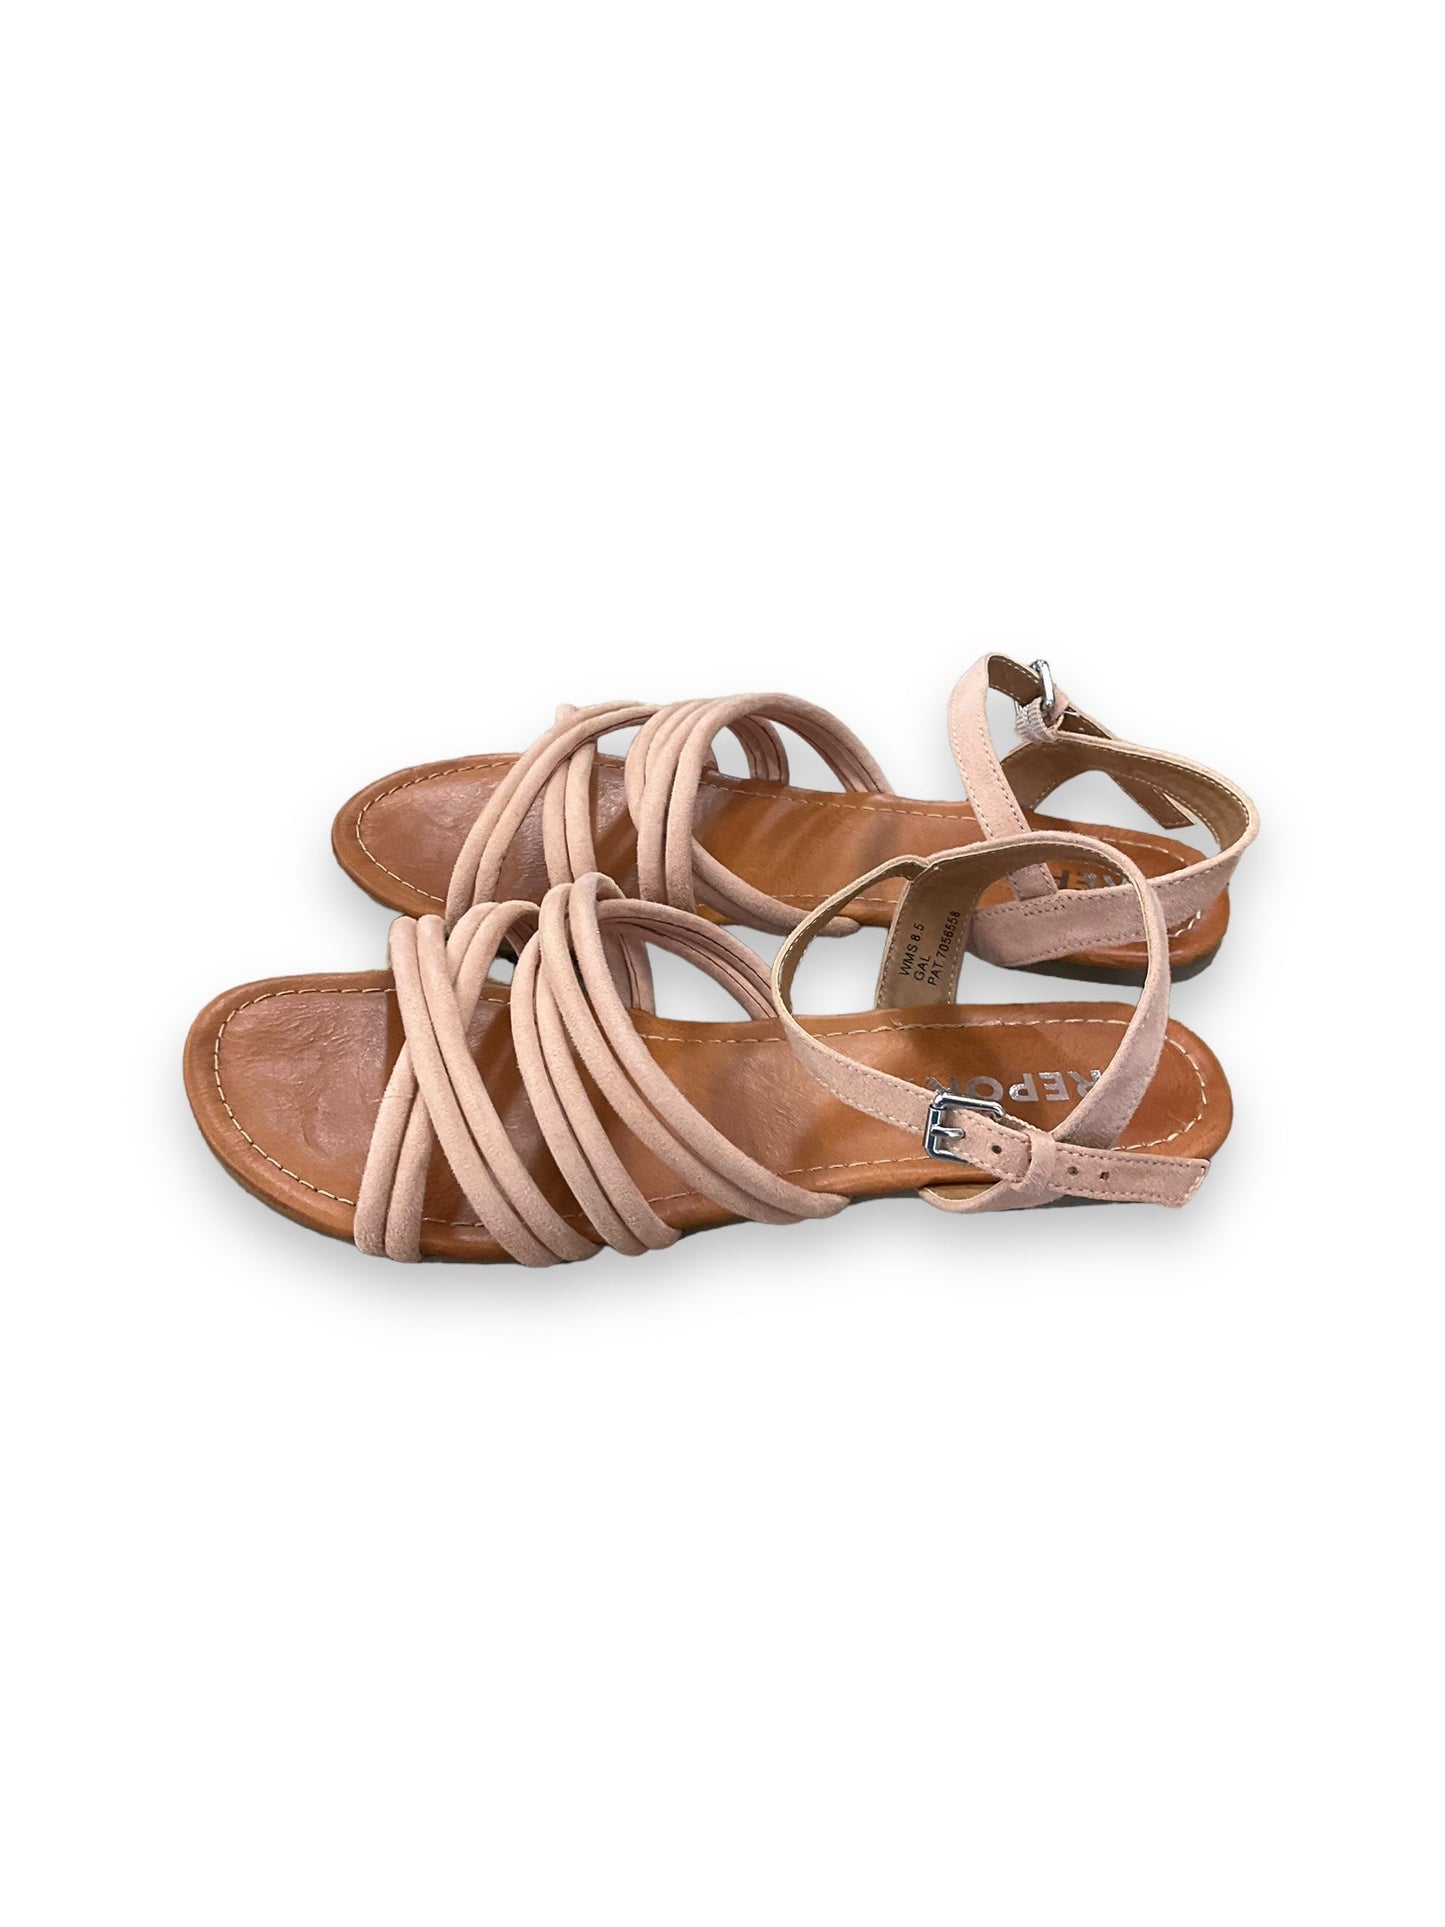 Brown & Pink Sandals Flats Report, Size 8.5